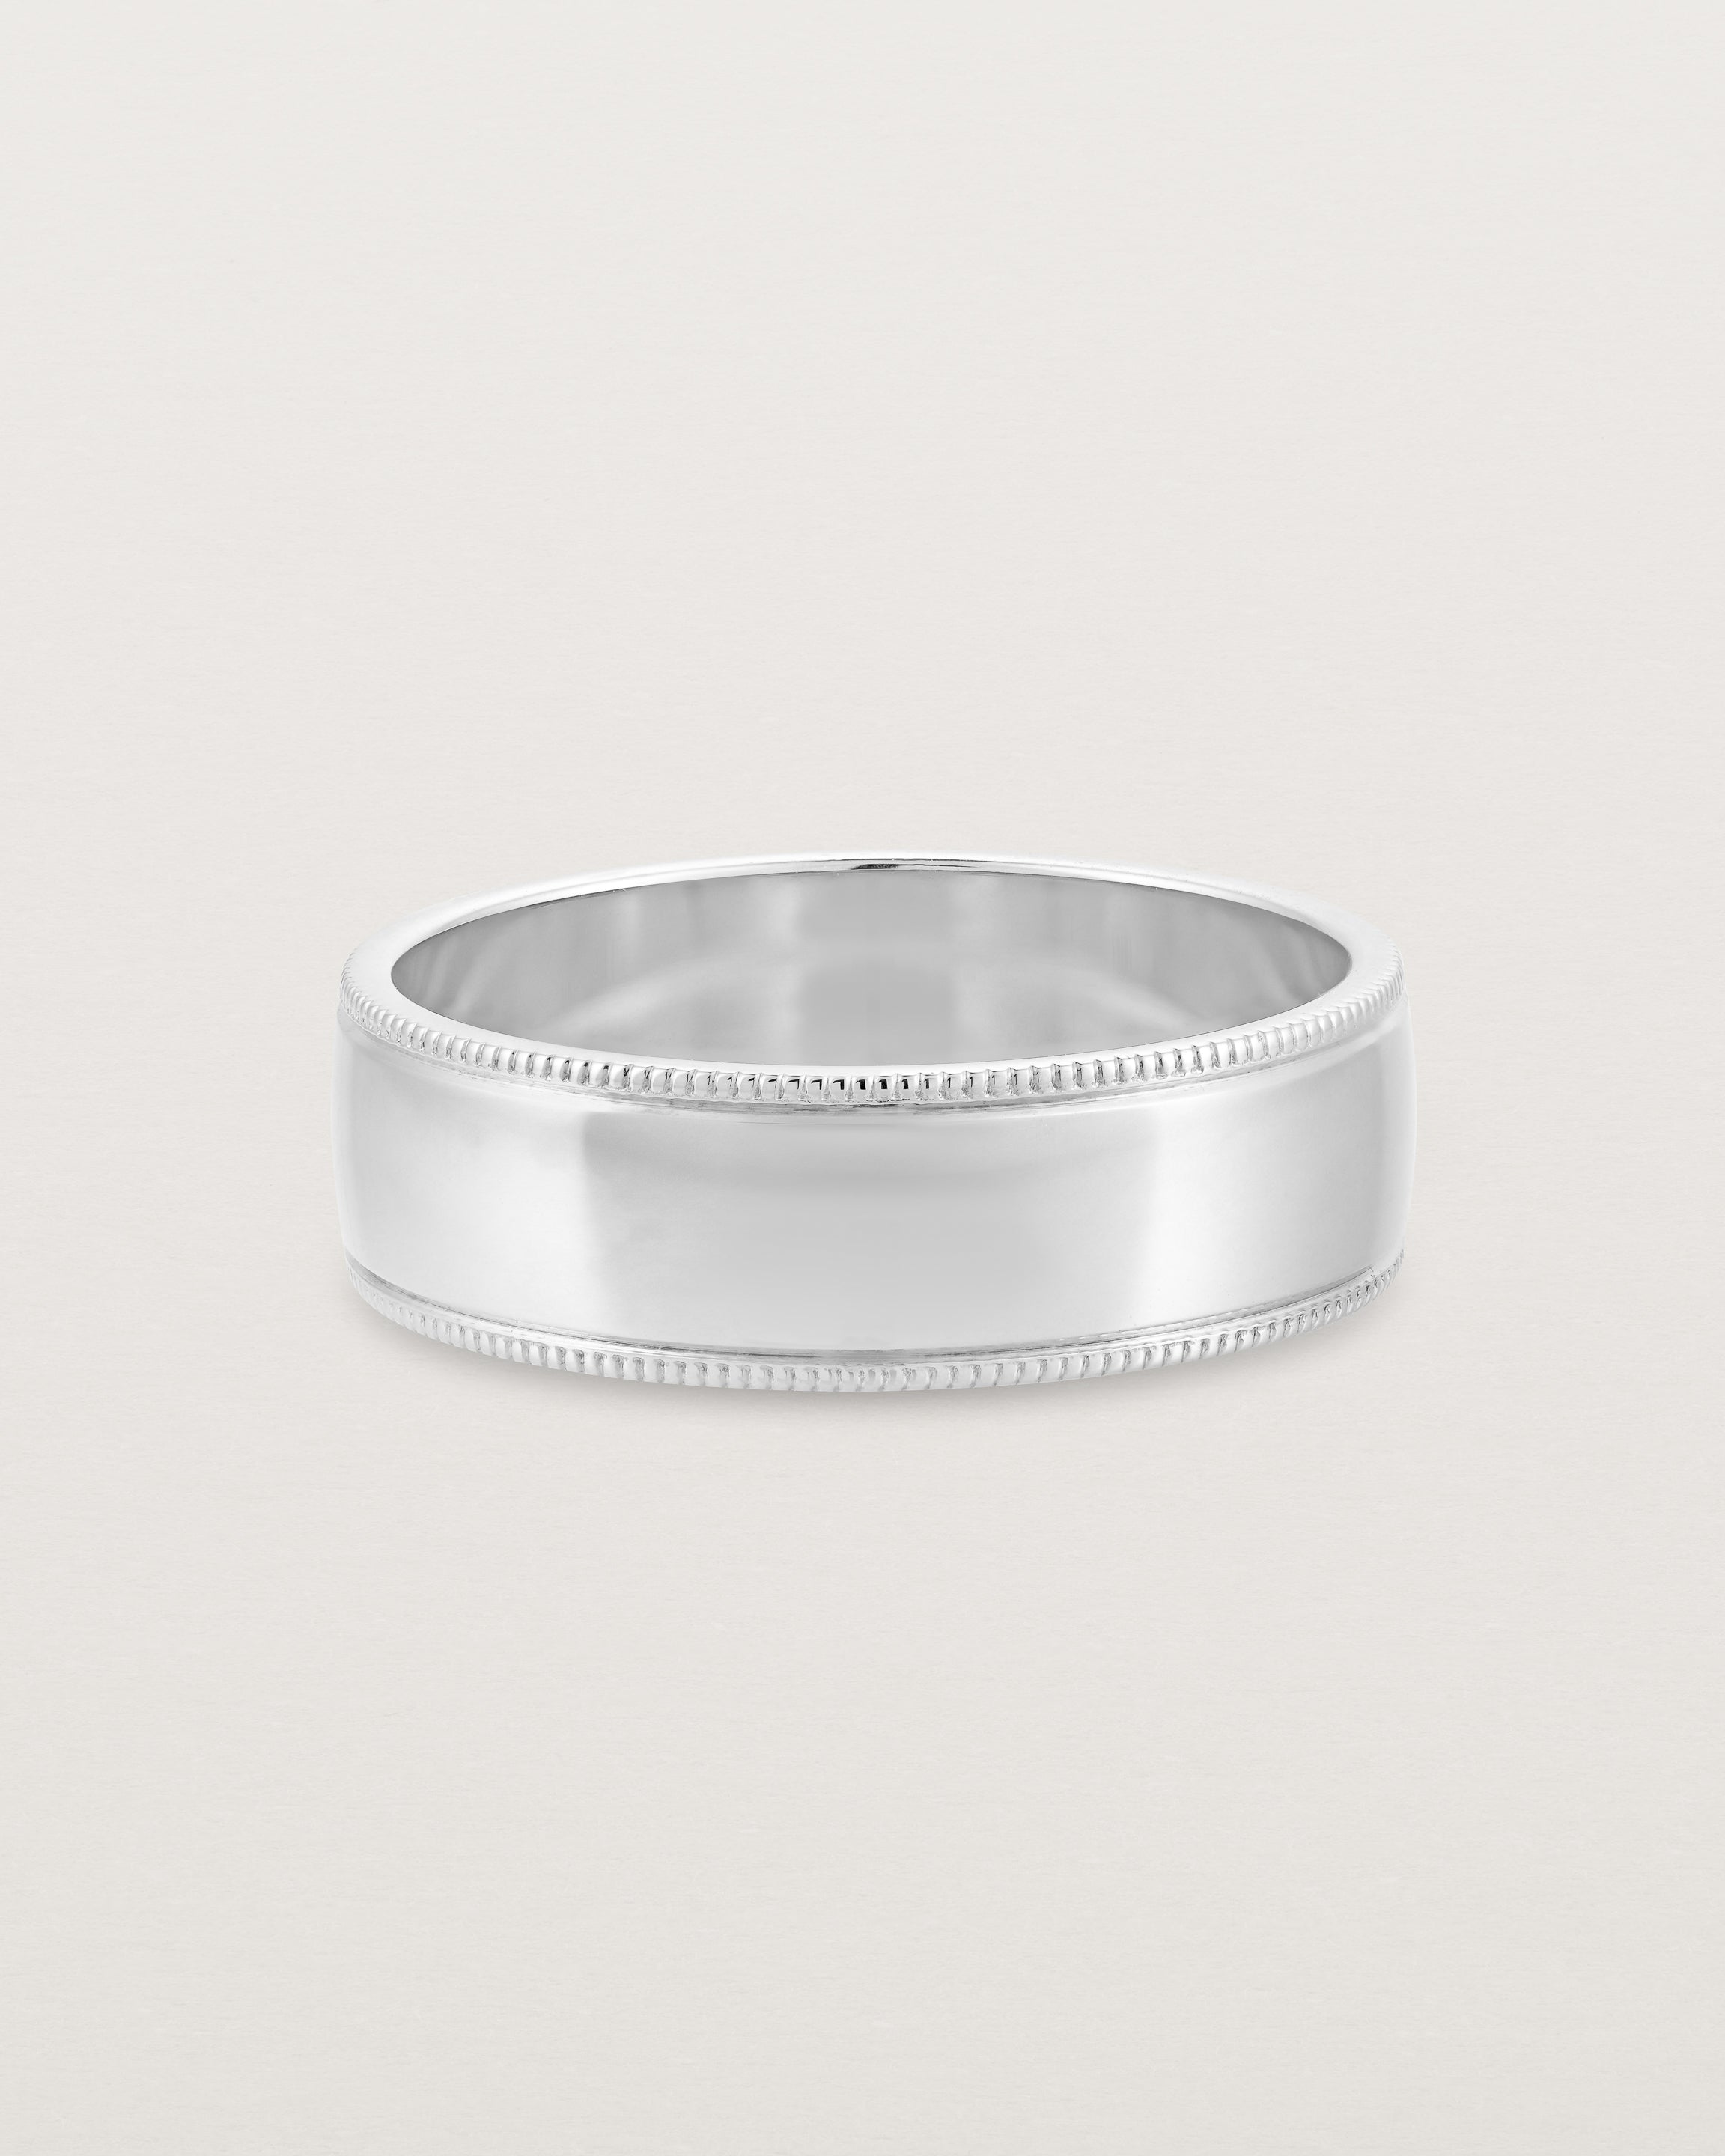 Front view of the Millgrain Wedding Ring | 6mm in White Gold.